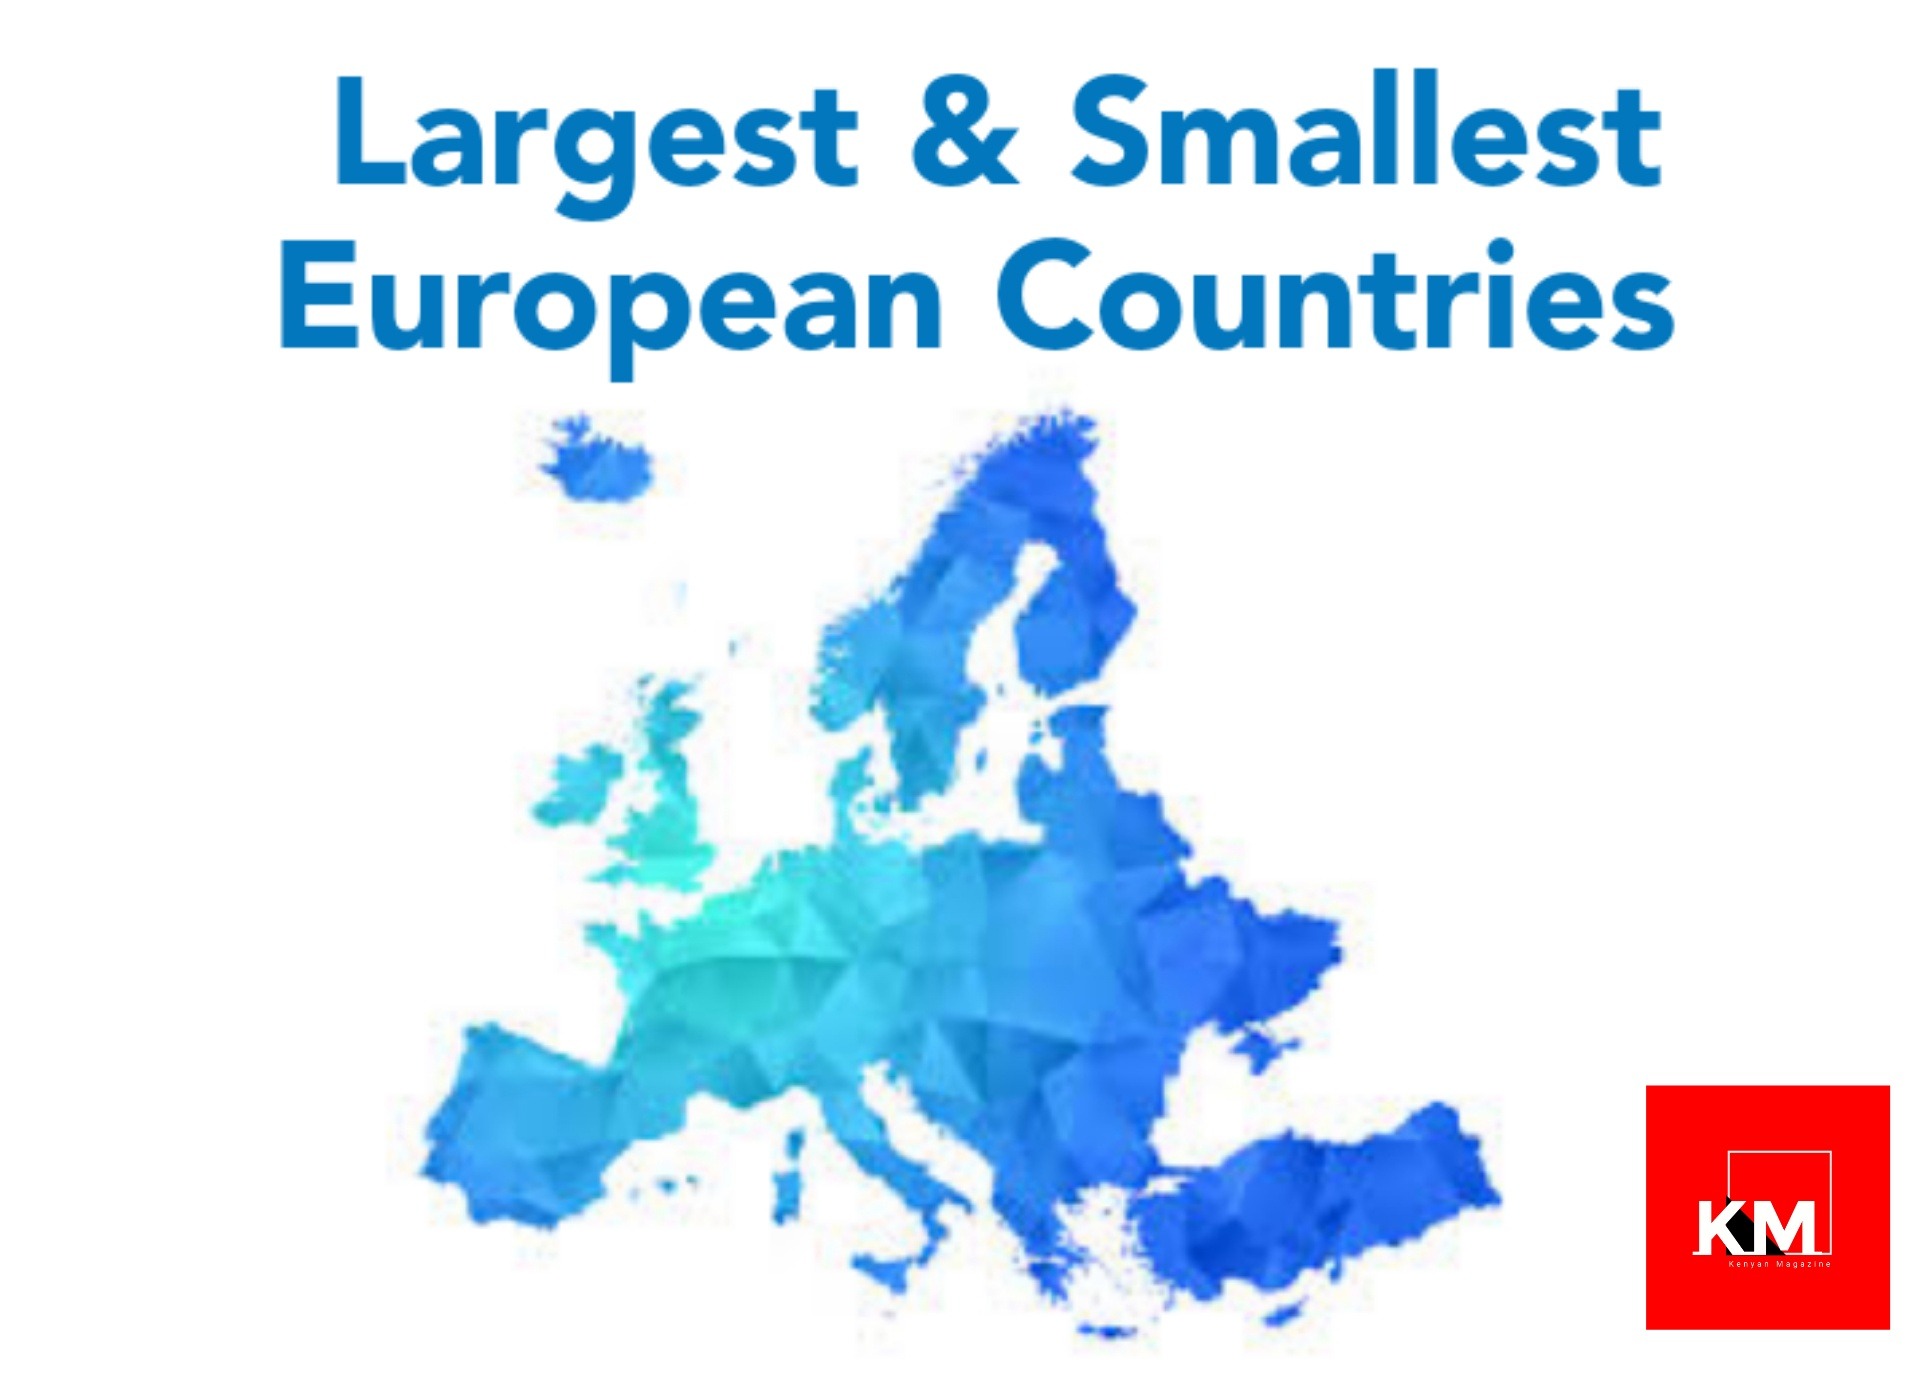 Largest countries and smallest countries in Europe